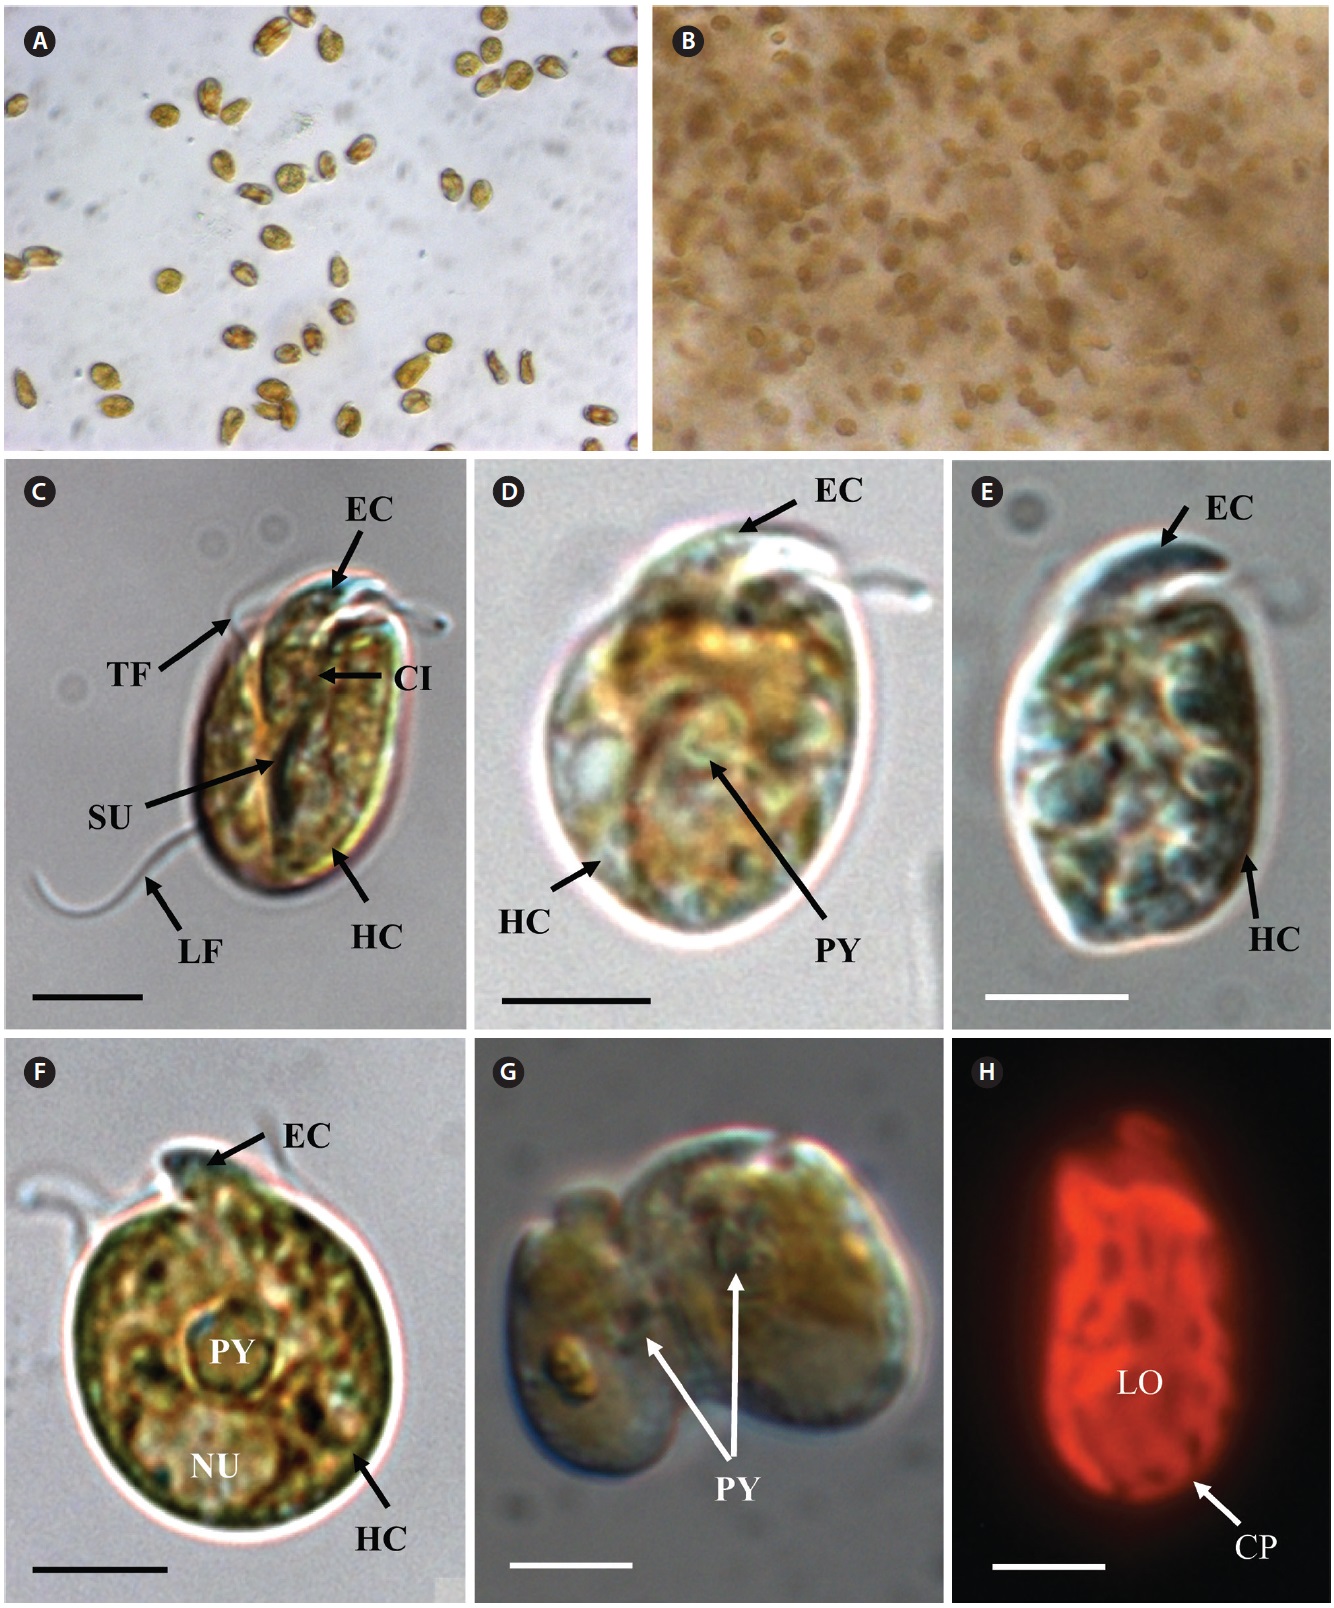 Micrographs of the Korean strain of Amphidinium massartii AMJJ1 under light microscopy (A-G) and epifluorescent microscopy (H). (A) Motile cells. (B) Cells embedded in mucilage. (C) Ventral view showing an almost ellipsoidal cell with a small epicone (EC) over a large hypocone (HC). The V-shaped cingulum (CI), transverse flagellum (TF), longitudinal flagellum (LF), and the sulcus (SU) are also shown. (D) Ventral view showing a pyrenoid (PY) located near the central region. (E) Lateral view. (F) Dorsal view showing the nucleus (NU) located in the hypocone and PY. (G) Cell division in a motile cell. (H) Lateral view a plastid (CP) radiating lobes (LO). Scale bars represent: C-H, 5 μm.